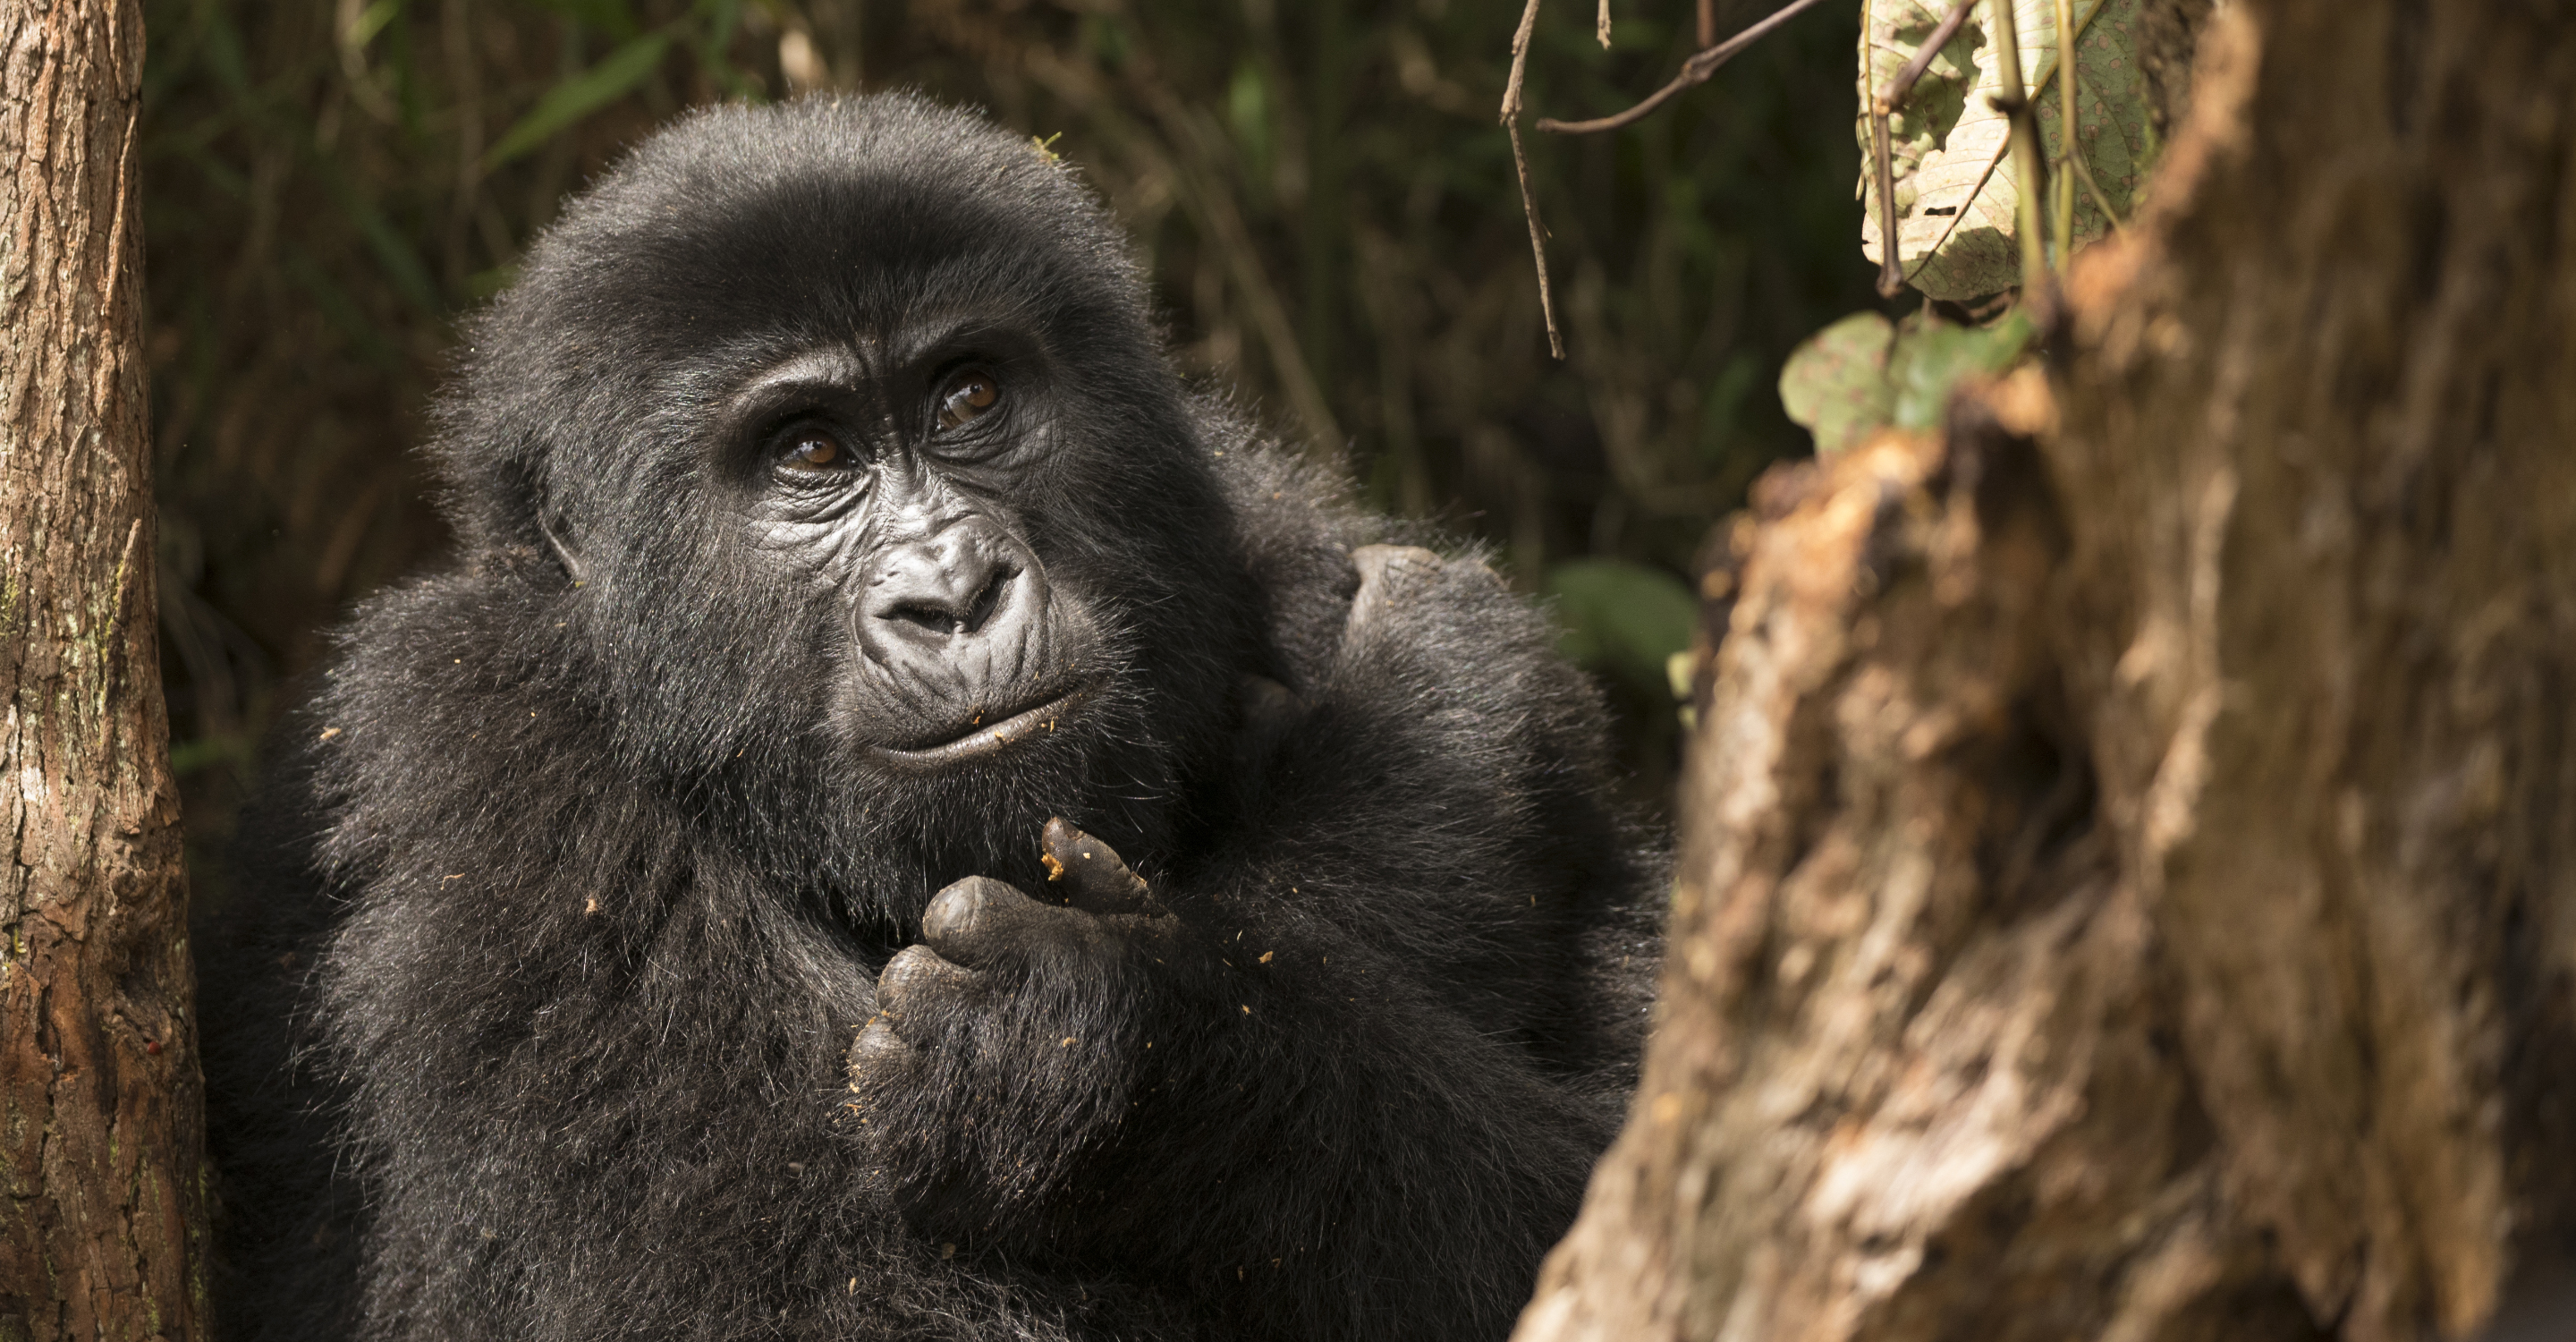 Close-up of a young mountain gorilla in Bwindi Impenetrable National Park, Uganda